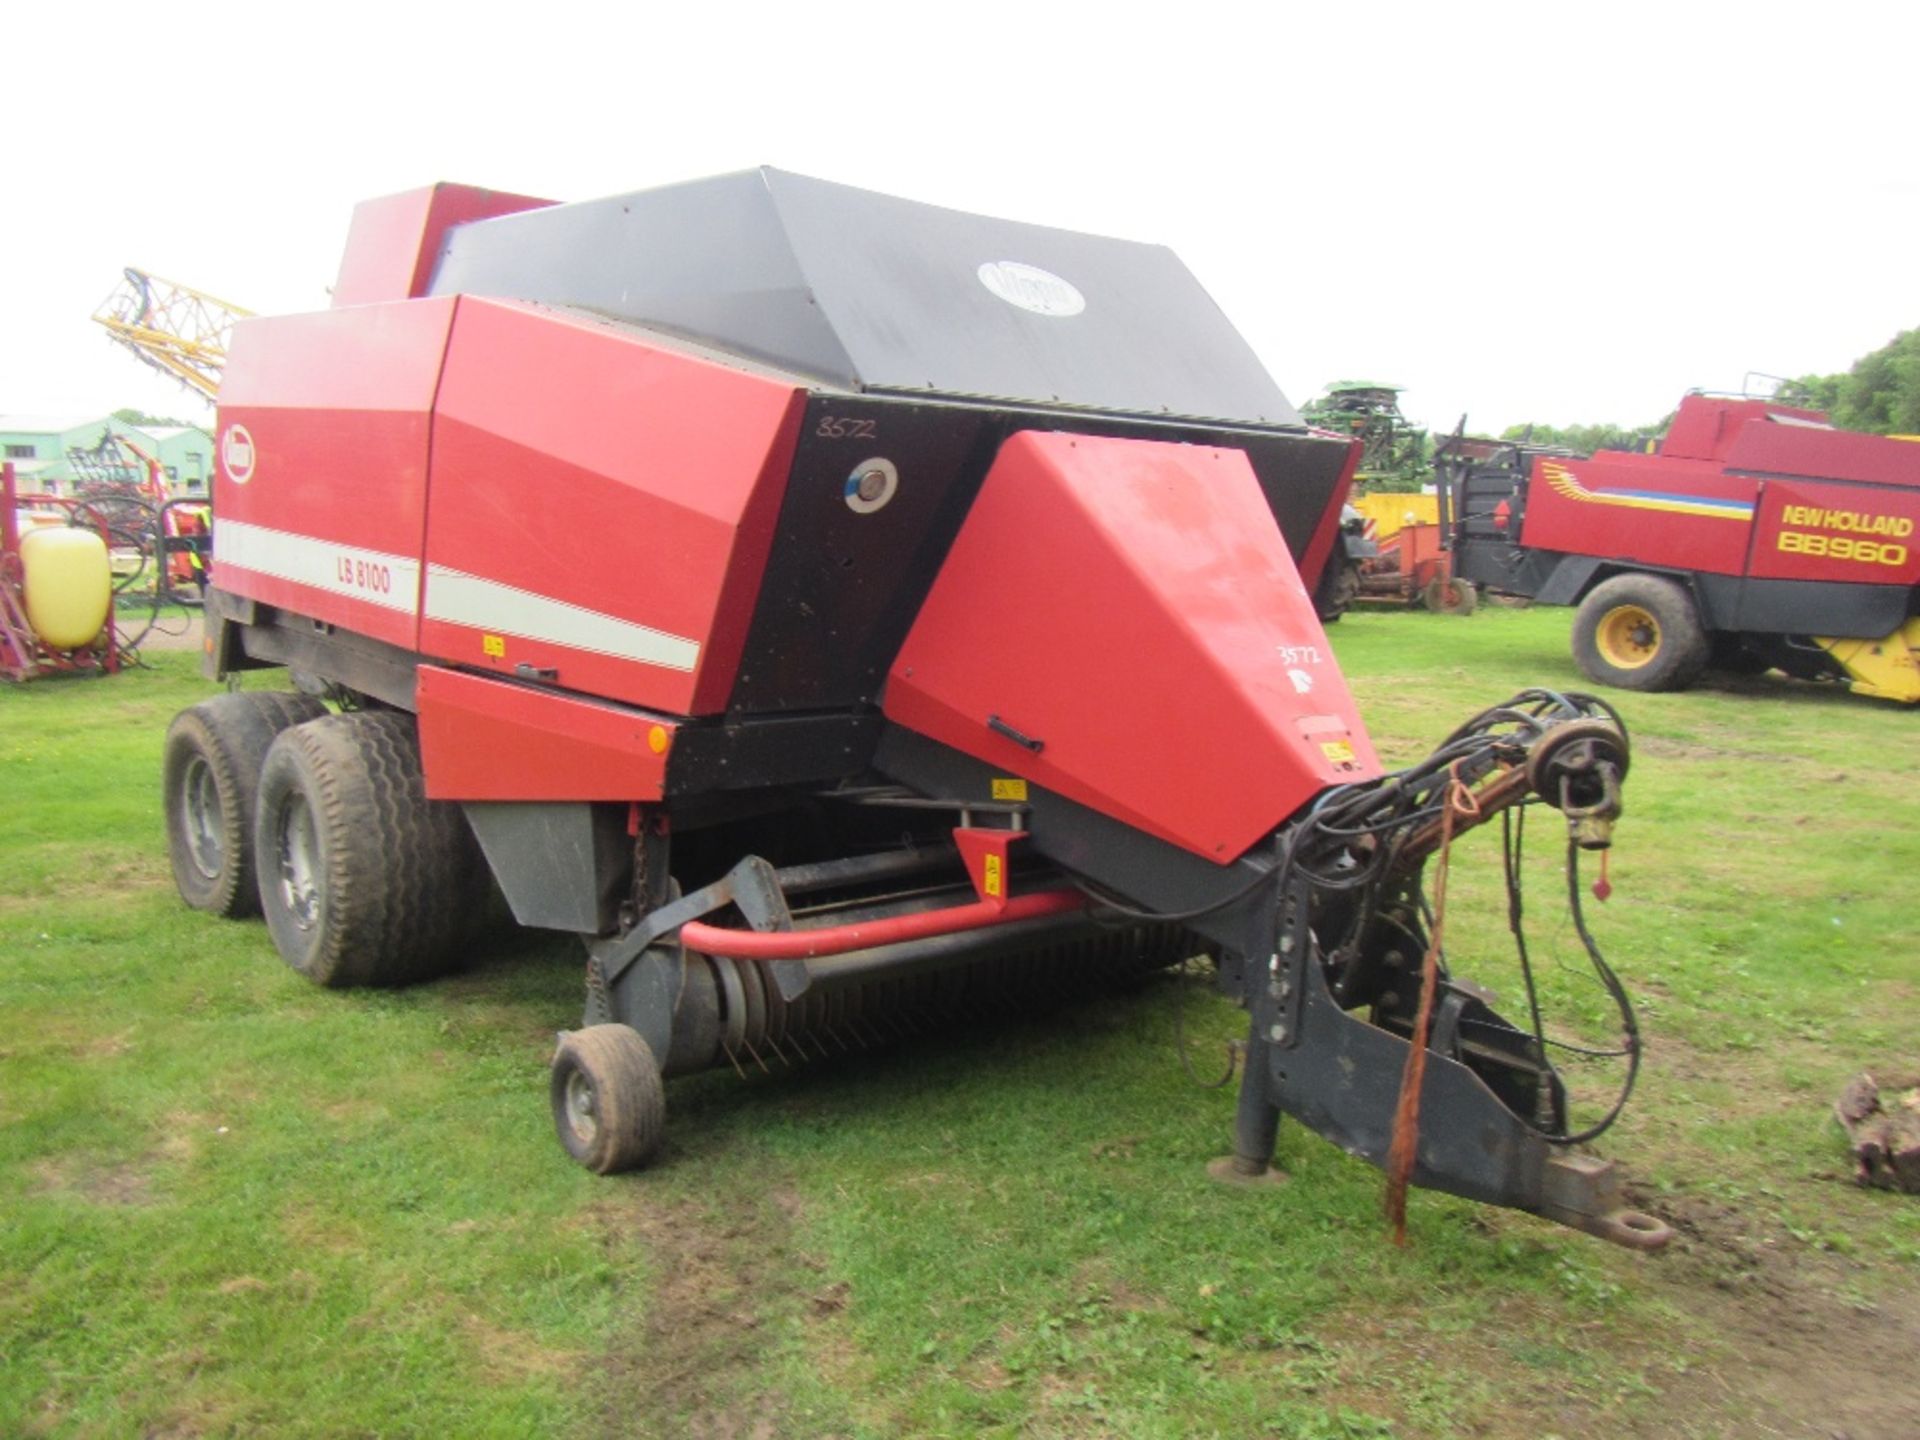 2002 Vicon LB 8100 Square Baler 80x70 bales, tandem axle with brakes, sprung suspension, fast tow,